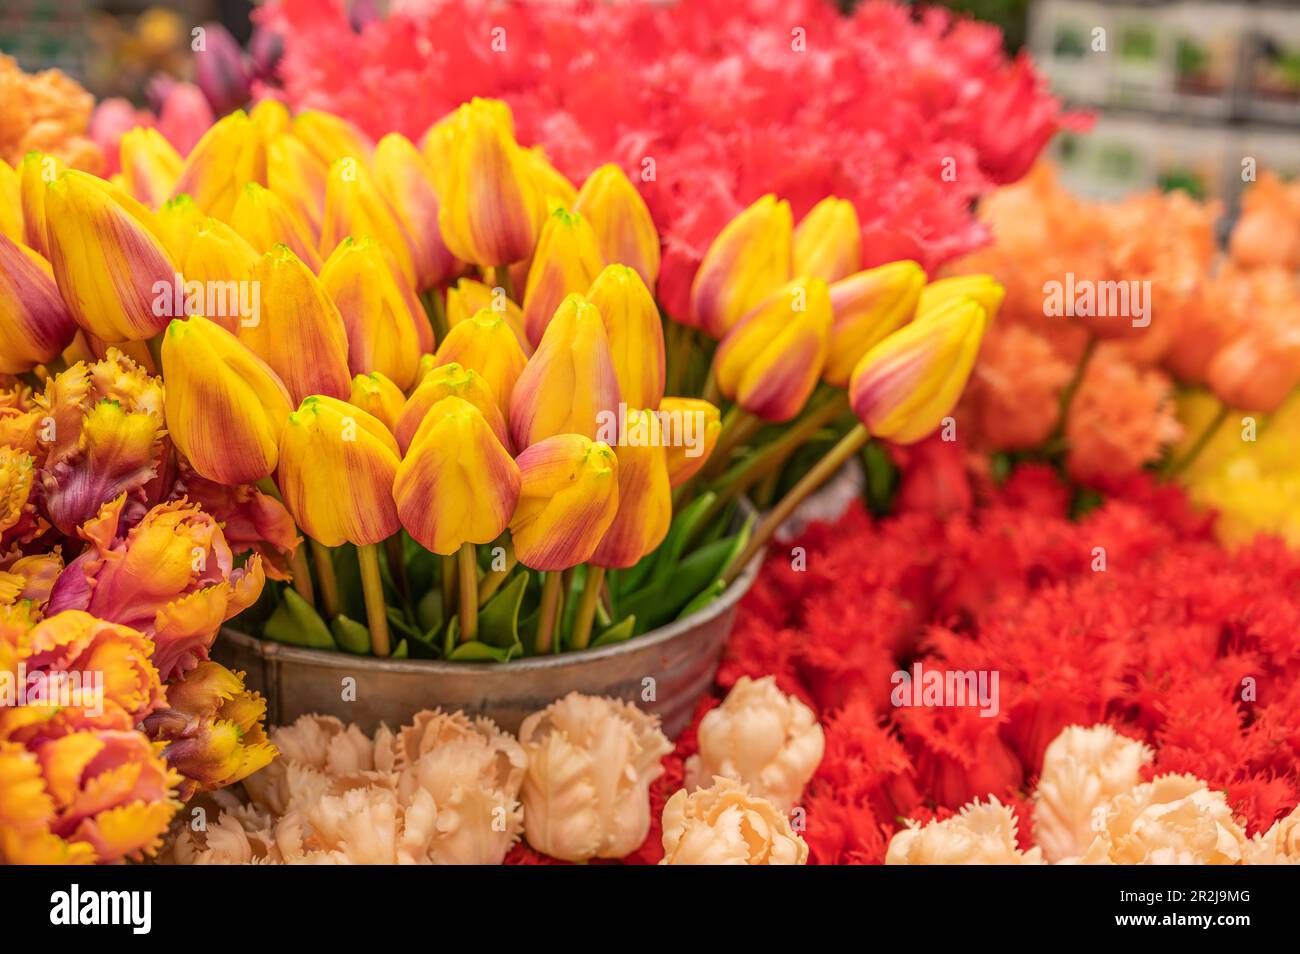 Tulips at the Flower Market on the Singel, Amsterdam, Benelux, Benelux States, North Holland, Noord-Holland, Netherlands Stock Photo